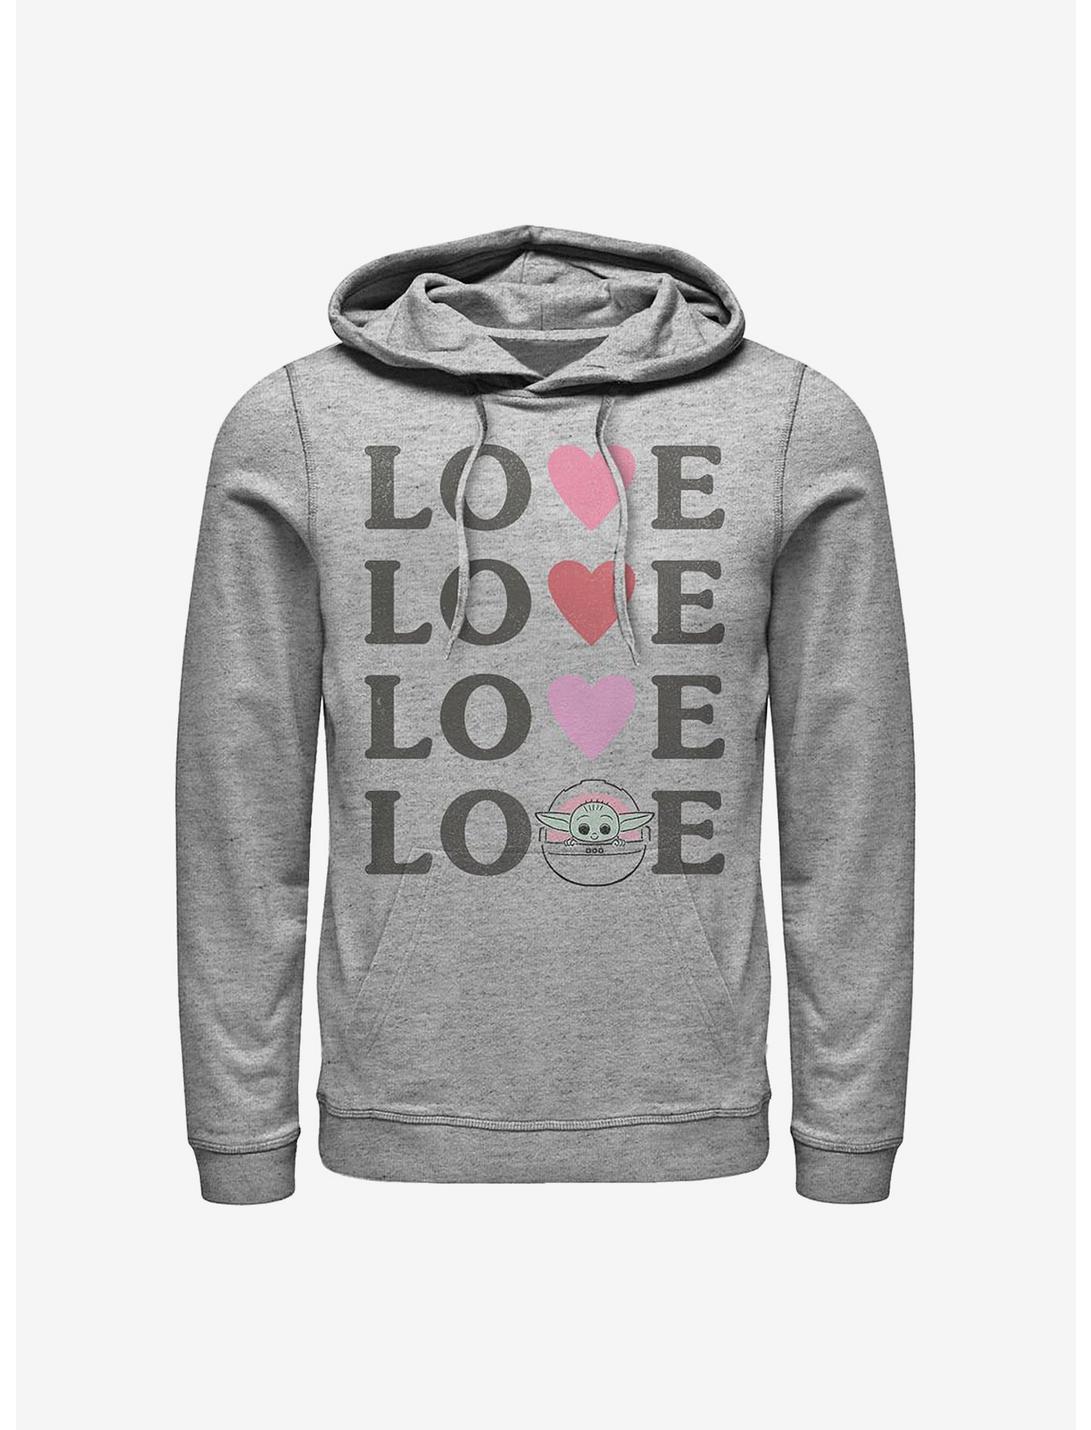 Star Wars The Mandalorian The Child Love Hoodie, ATH HTR, hi-res